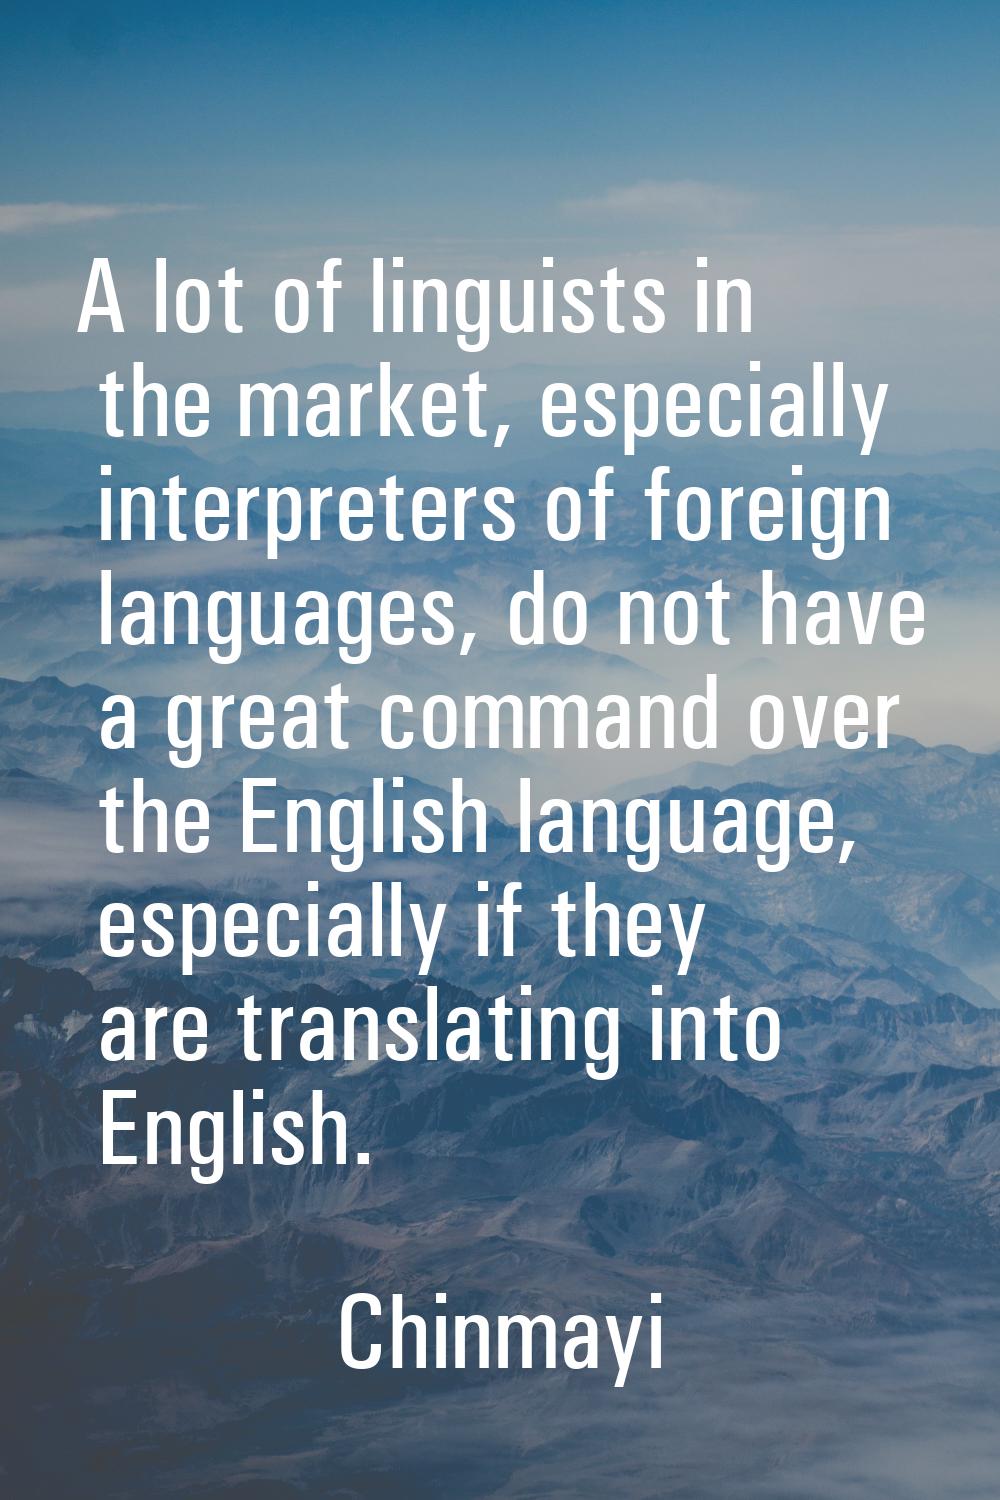 A lot of linguists in the market, especially interpreters of foreign languages, do not have a great